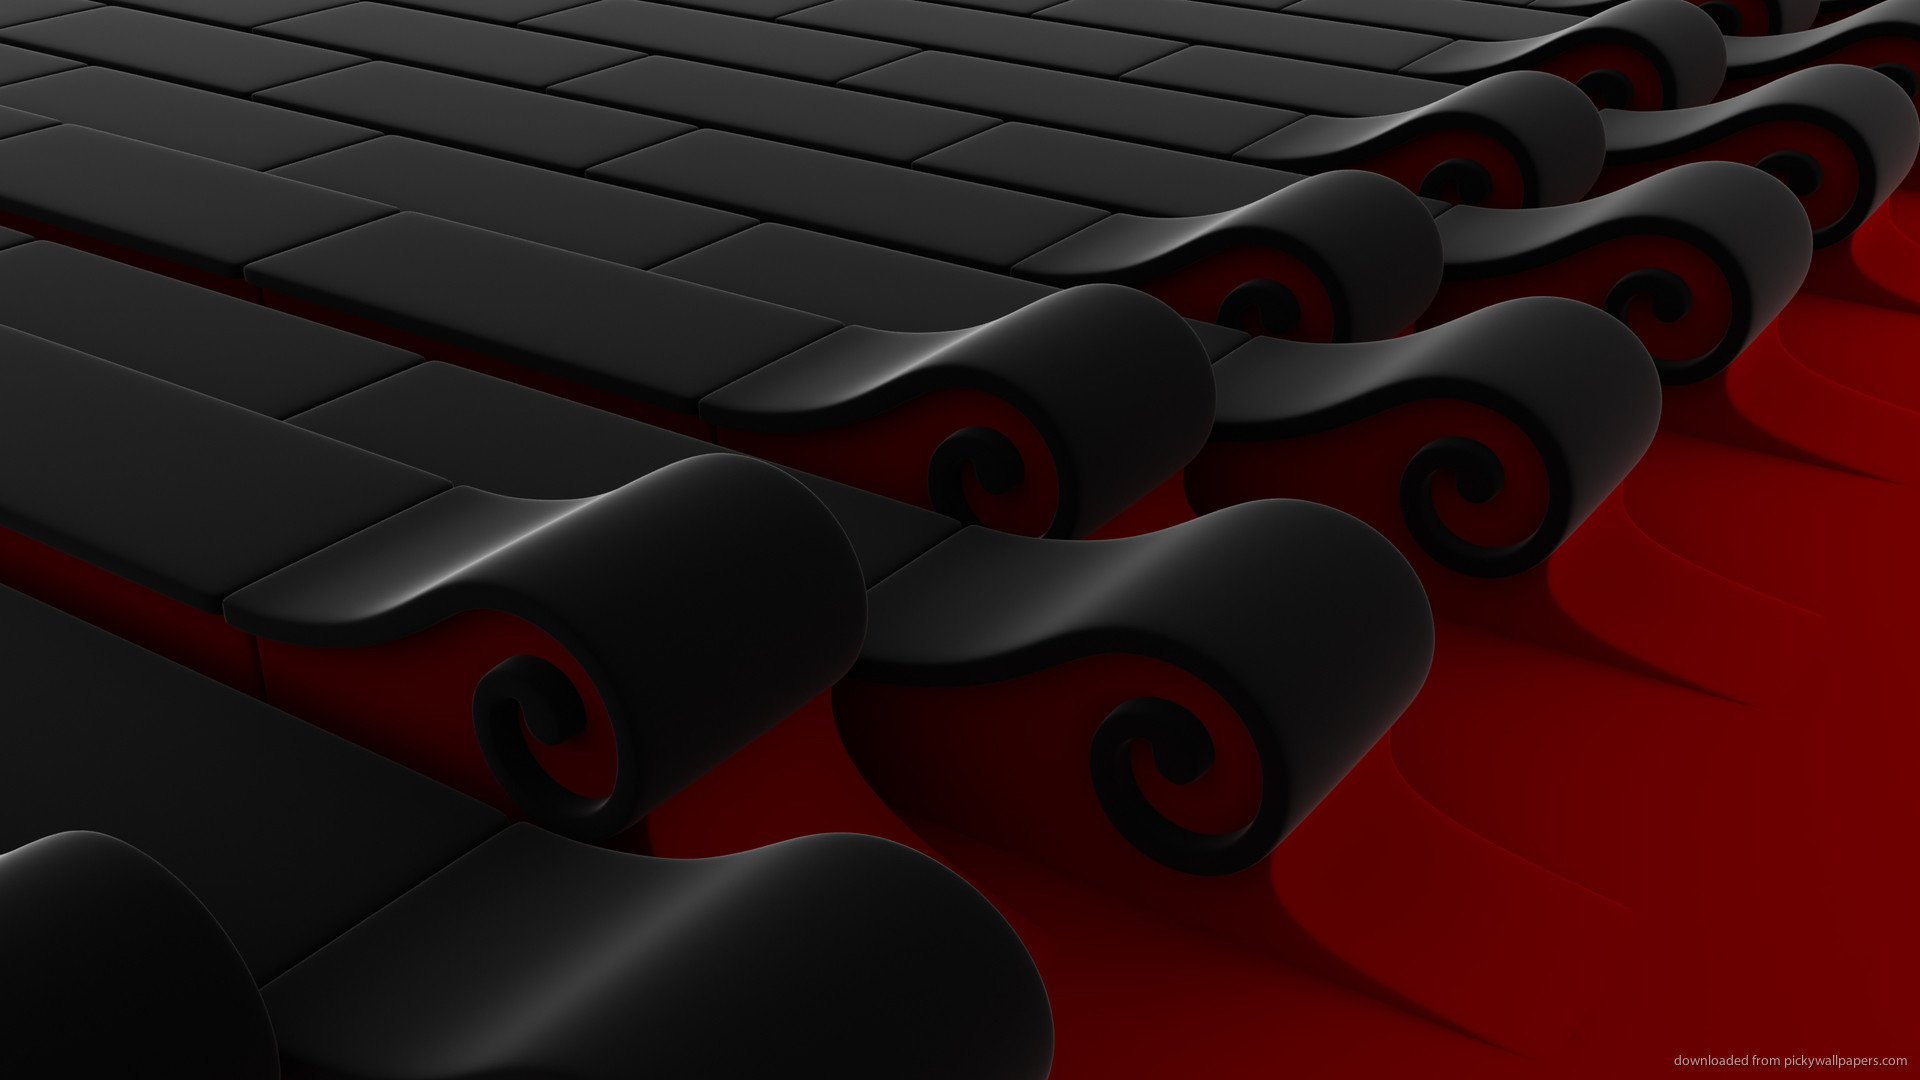 Black and Red Waves render for 1920×1080